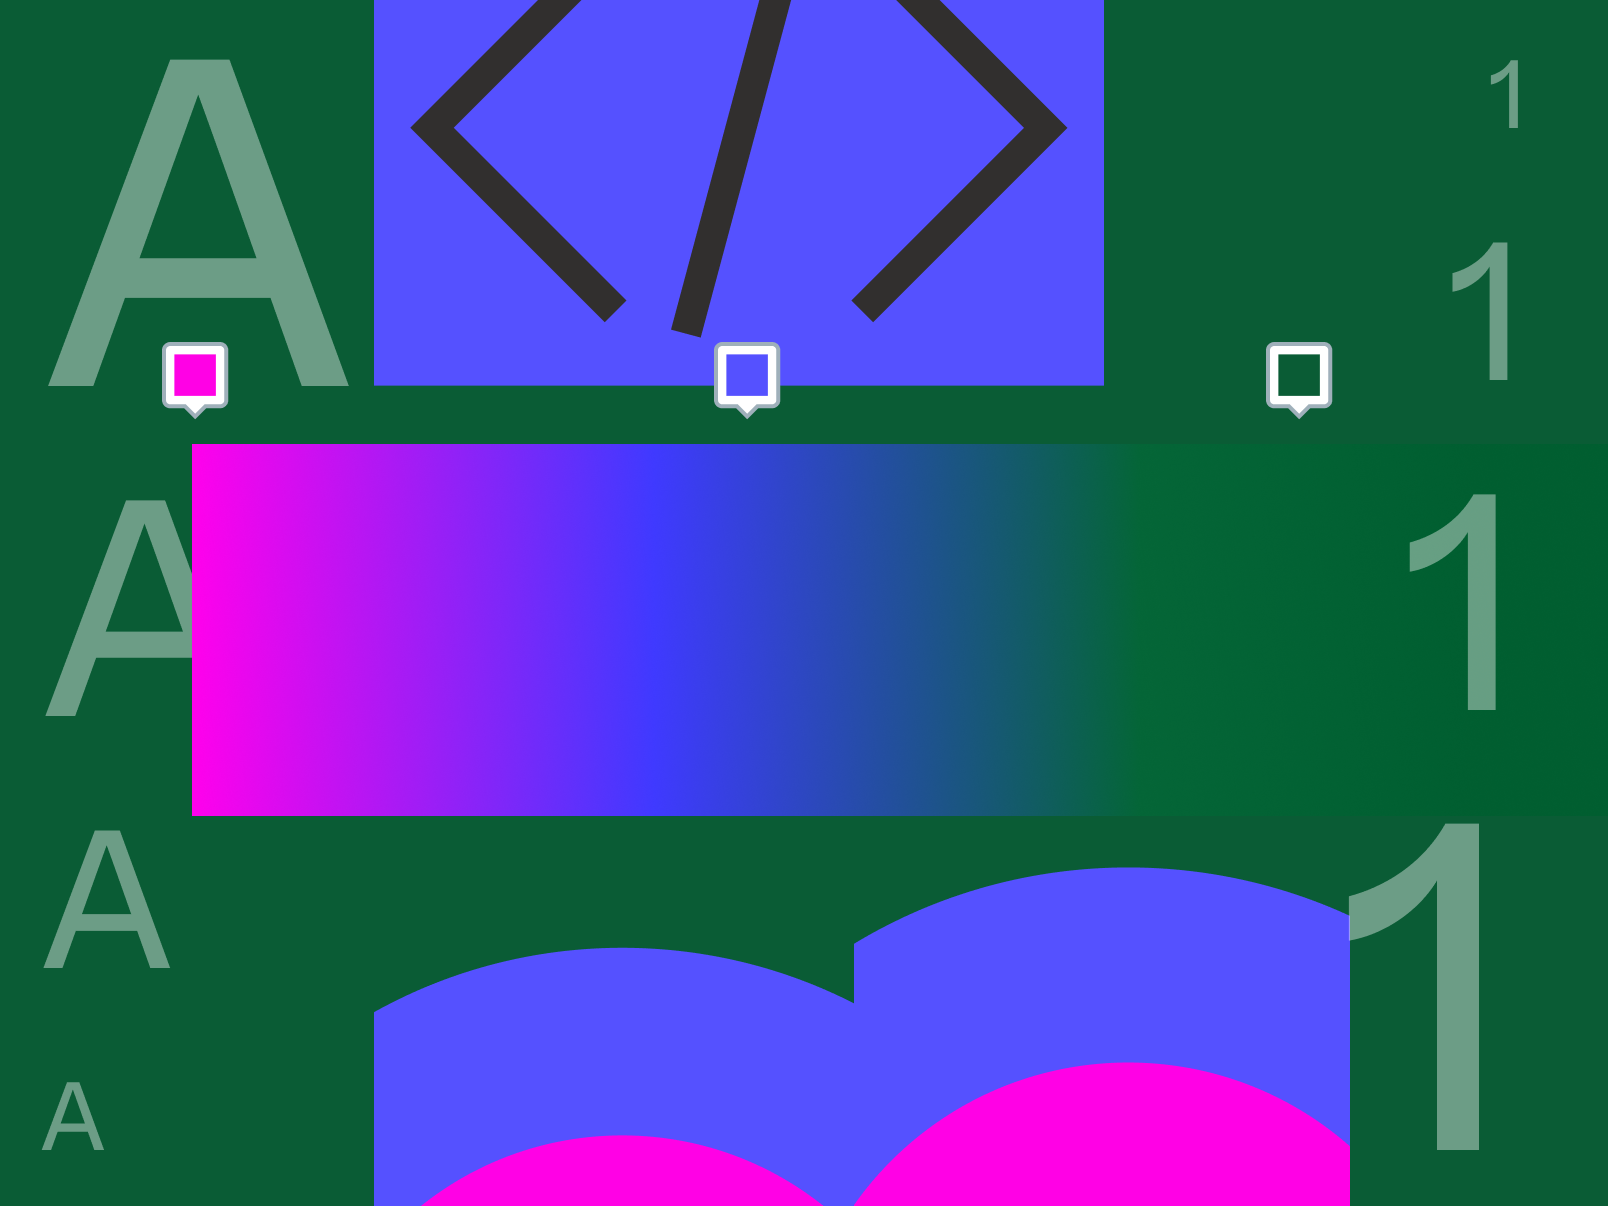 The image features a collage of abstract shapes and letters on a dark green background. In the upper left corner, there's a series of the letter "A" in a lighter green shade. A large blue rectangle with a darker blue outline is in the upper right, next to which are smaller shapes that resemble speech bubbles. The center of the image has a horizontal gradient bar transitioning from pink to blue. In the bottom right, there are more "1" digits in the same light green color, and the bottom left shows overlapping pink and blue curved shapes.